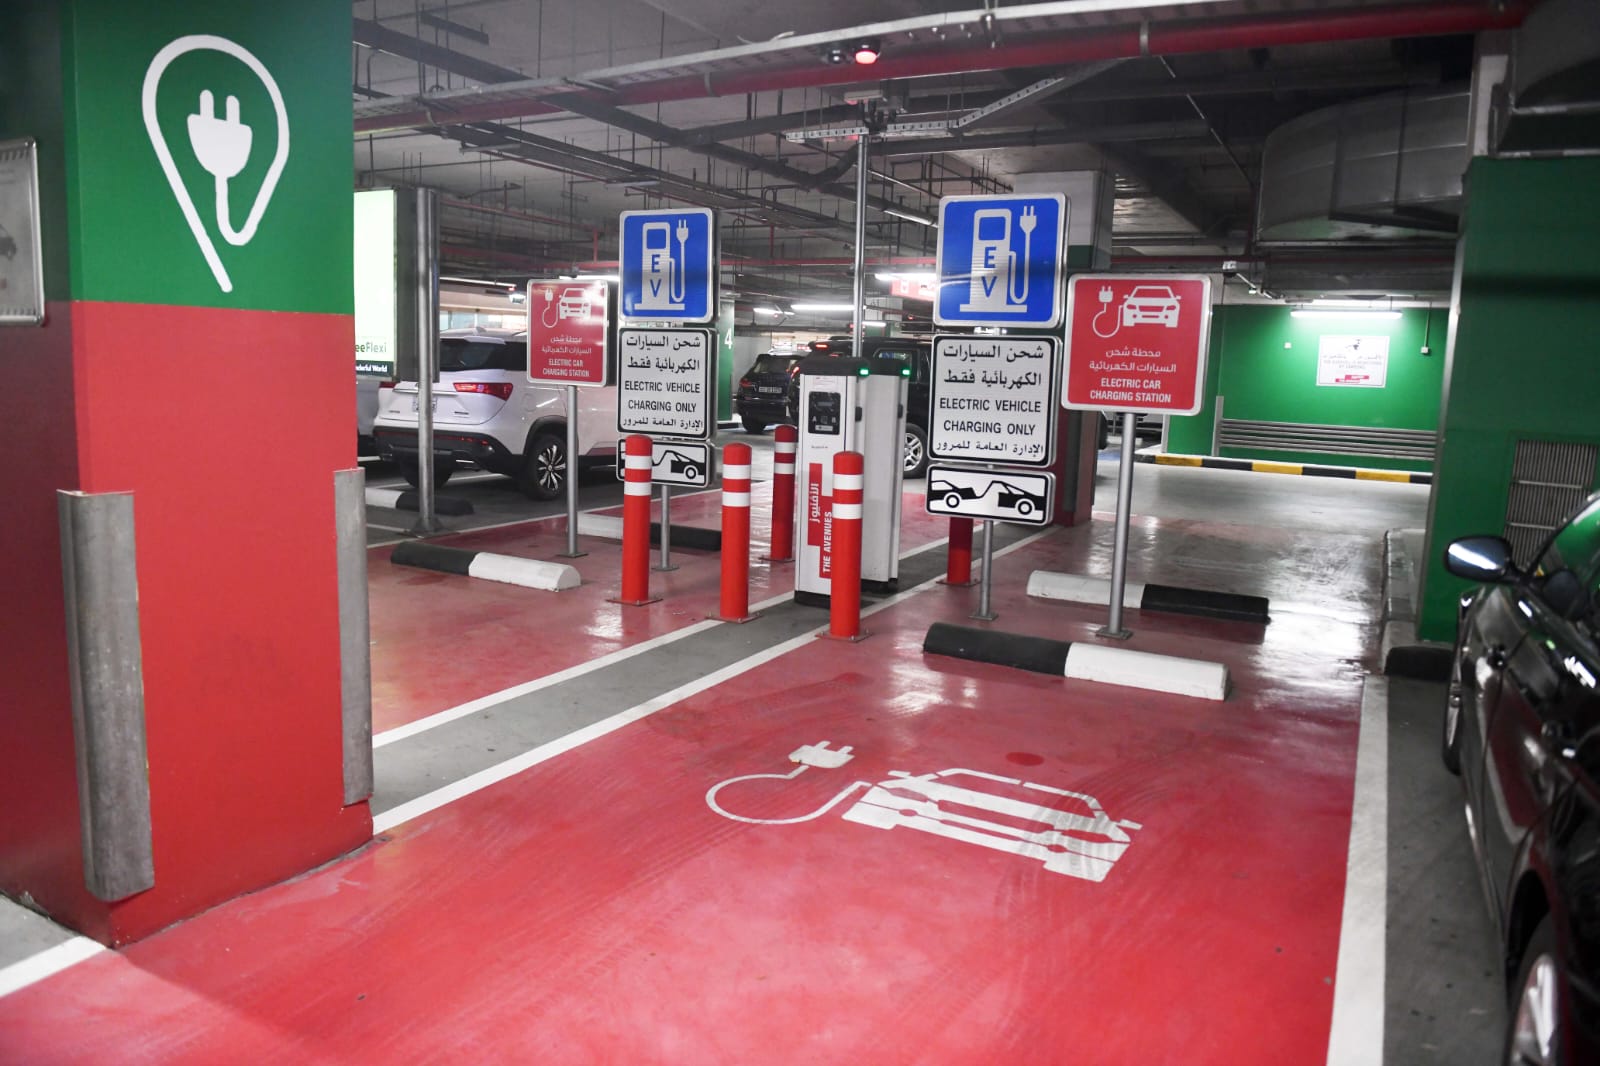 KUWAIT: A fully designated parking spot for electric vehicles. - KUNA photosn